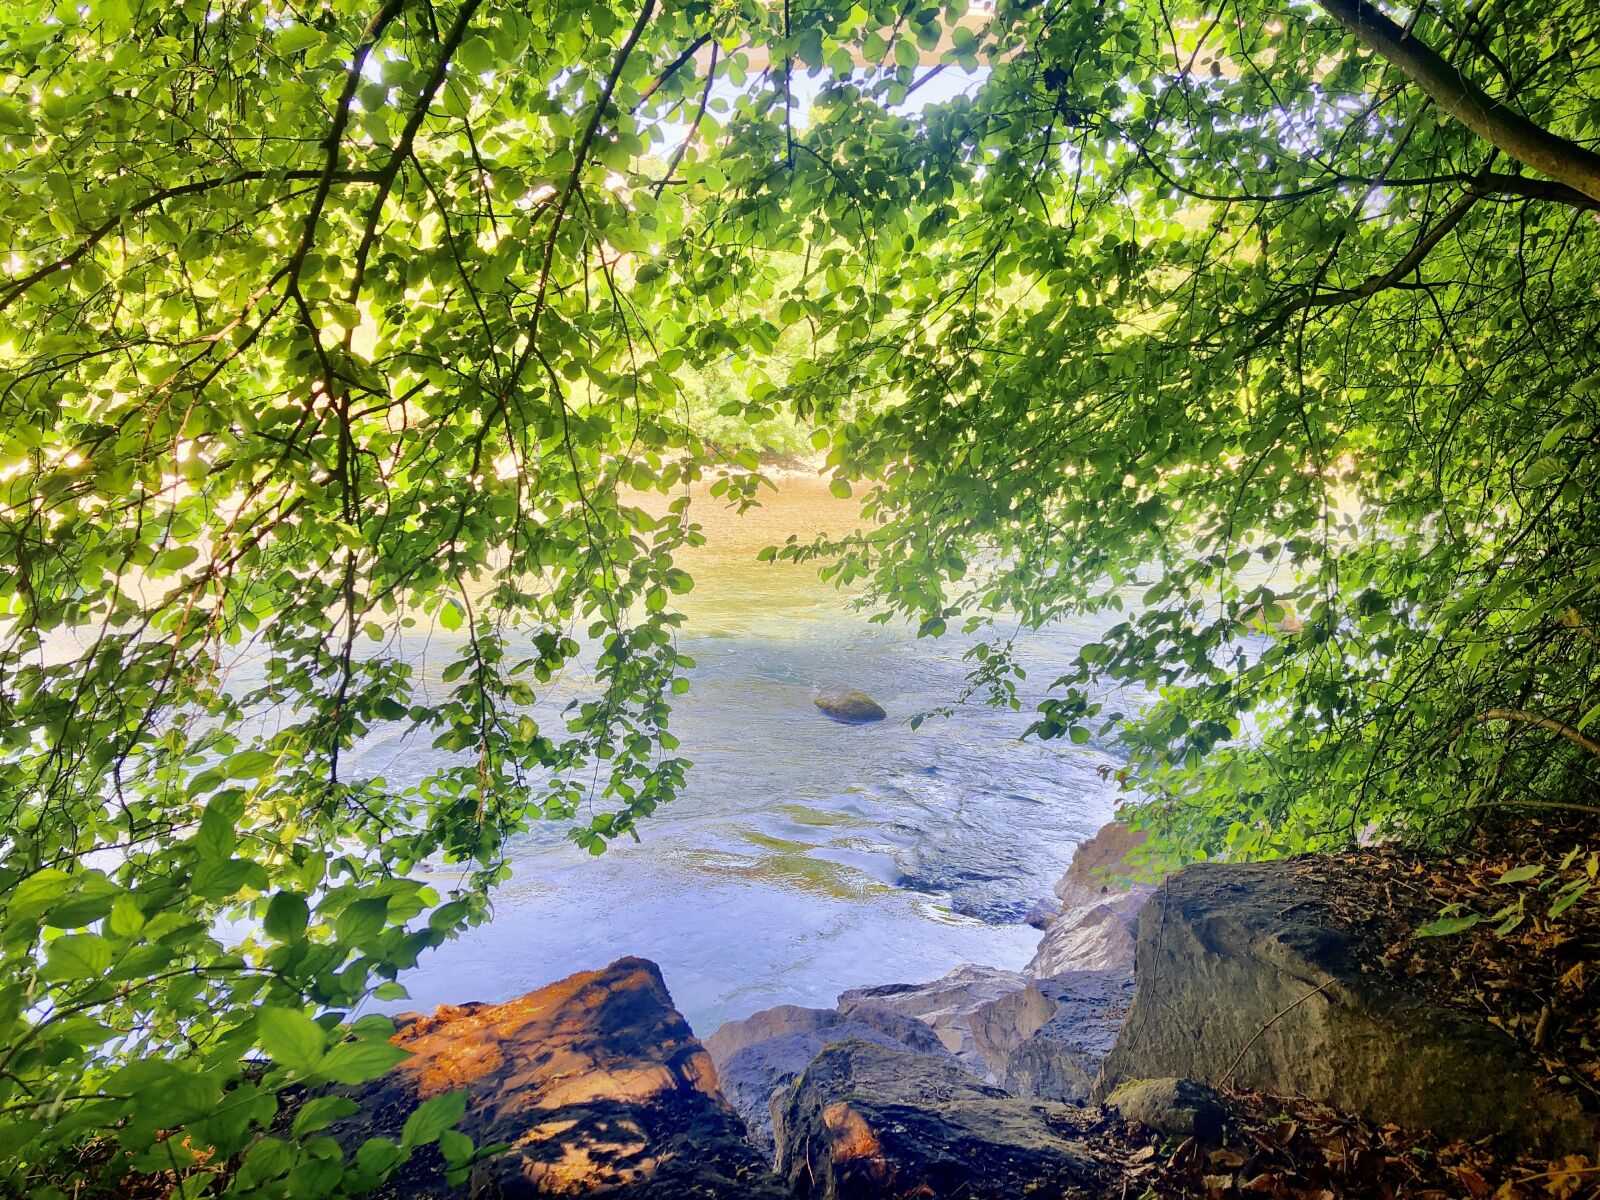 Apple iPhone X + iPhone X back camera 4mm f/1.8 sample photo. Nature, creek, river photography